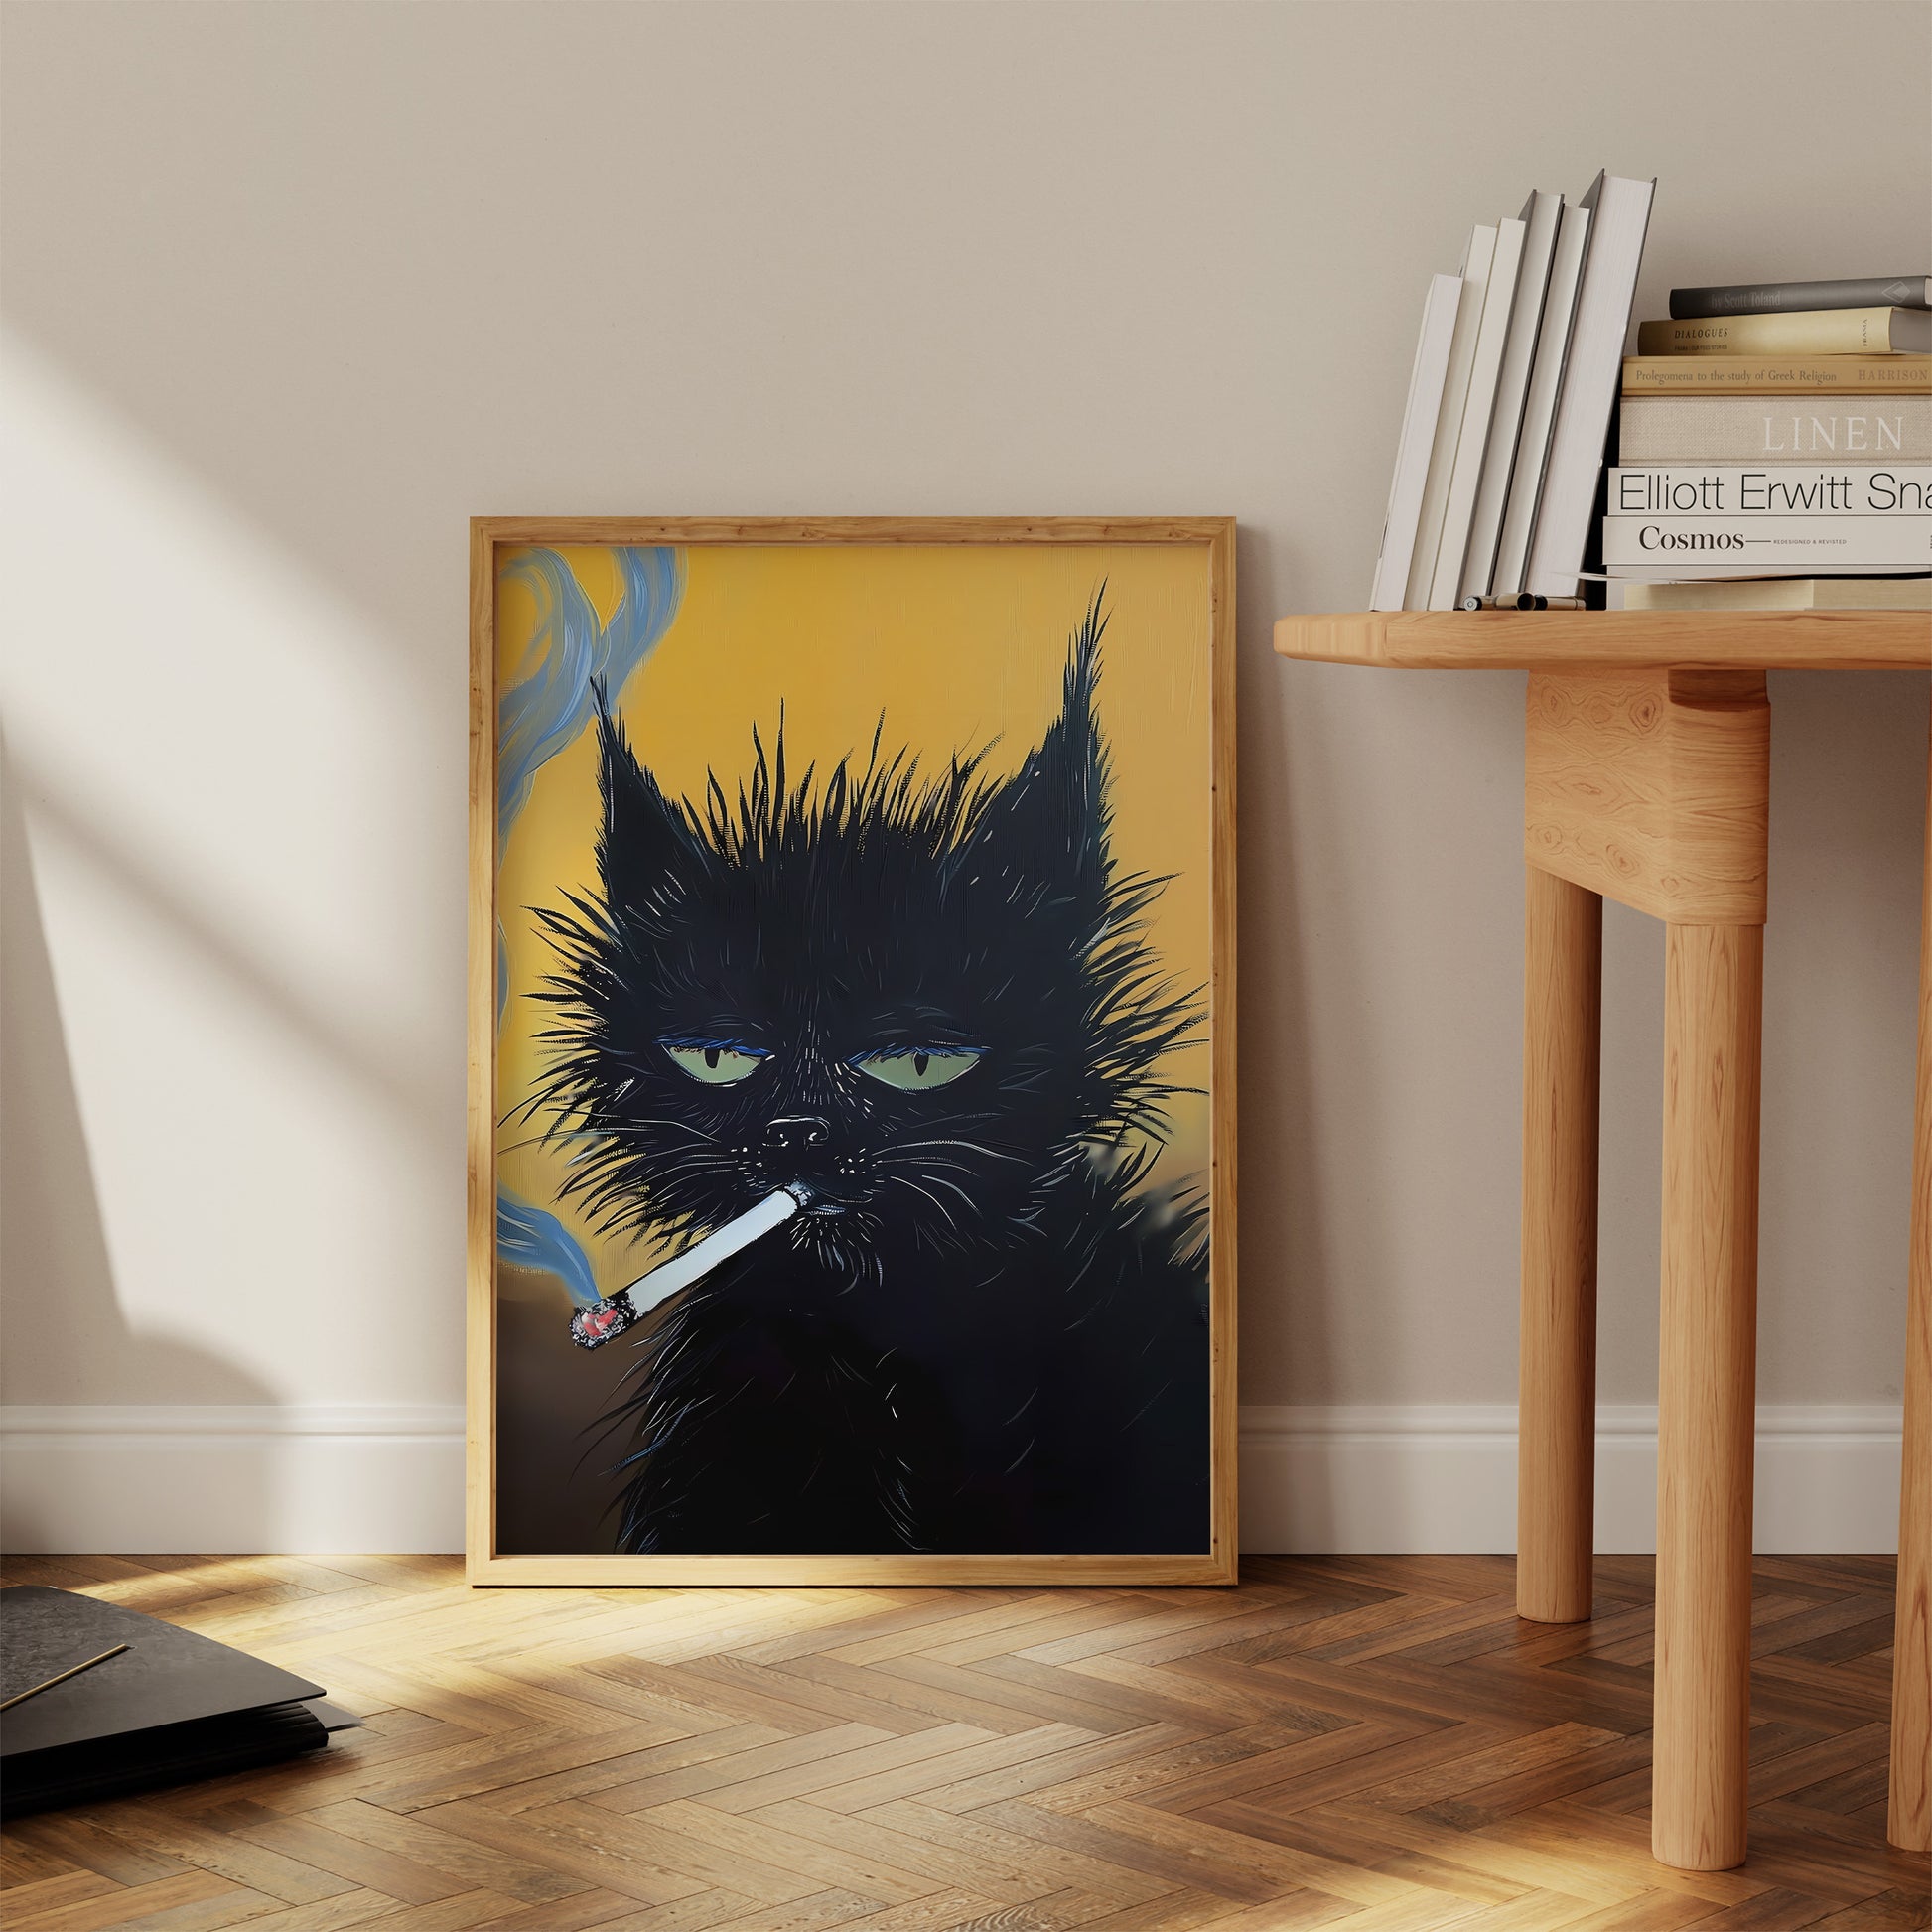 A framed poster of a black cat with green eyes on a floor leaning against a wall.